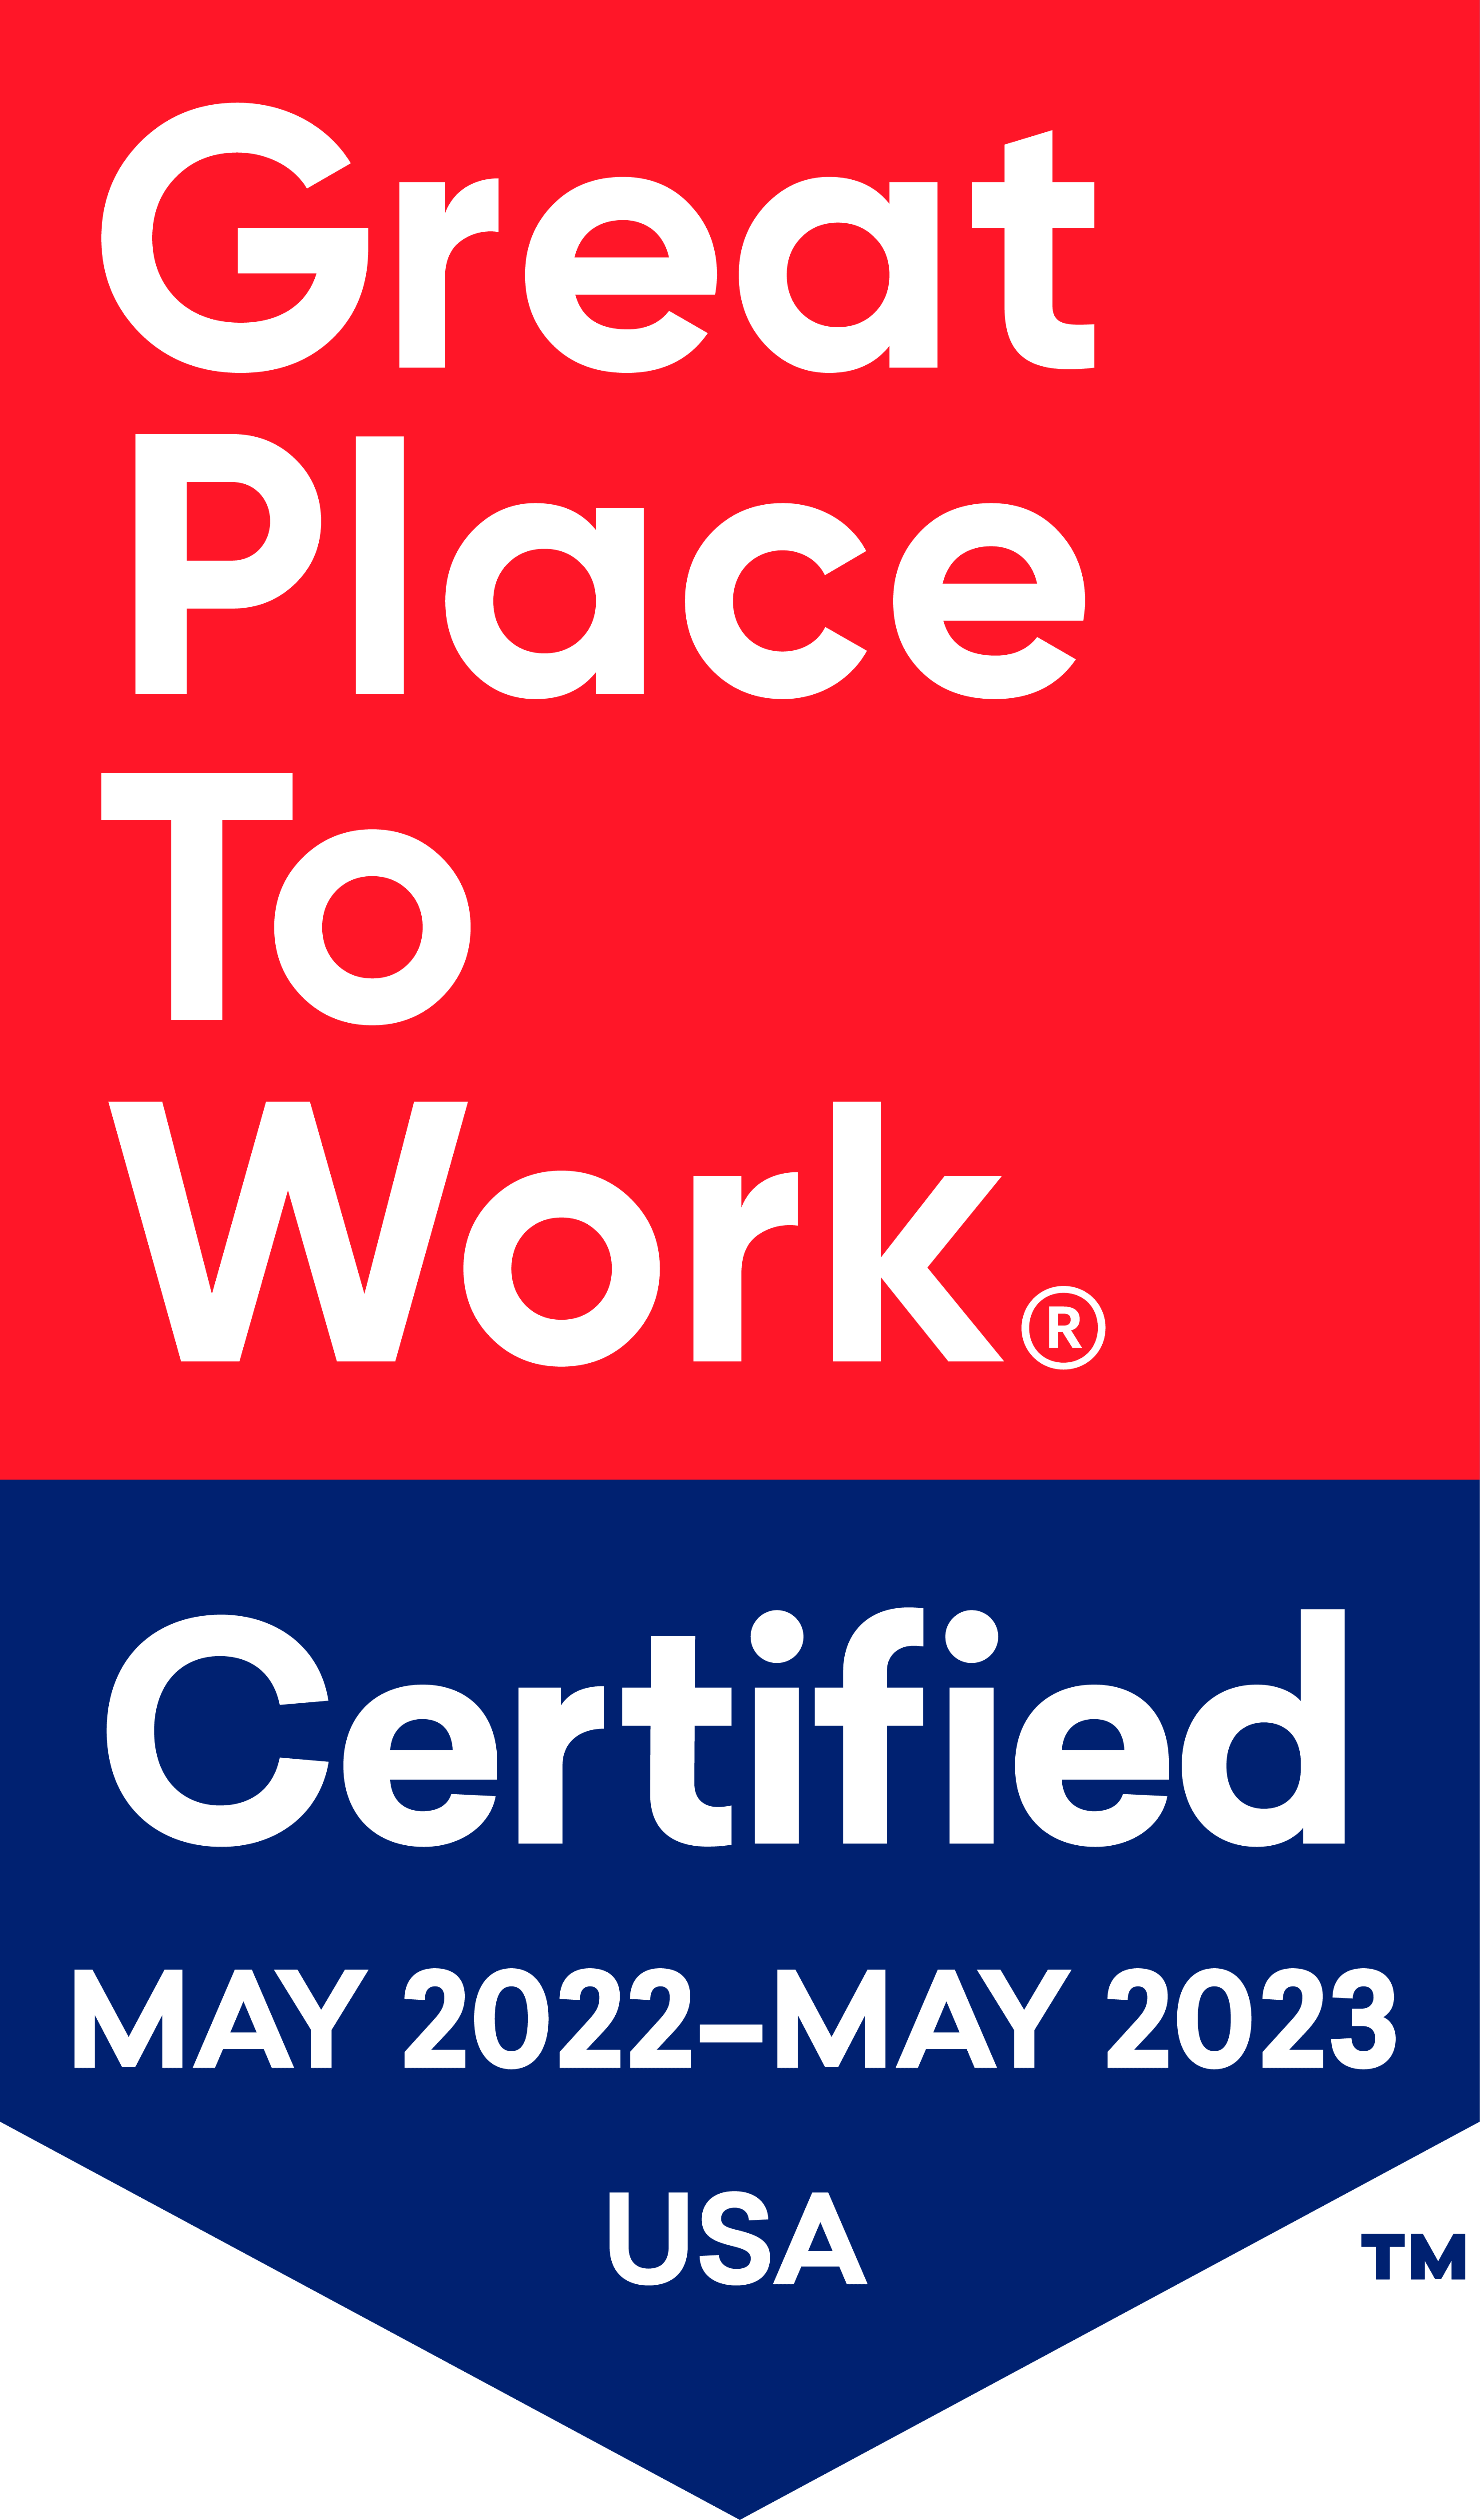 Great place to work badge at Clearwater at South Bay